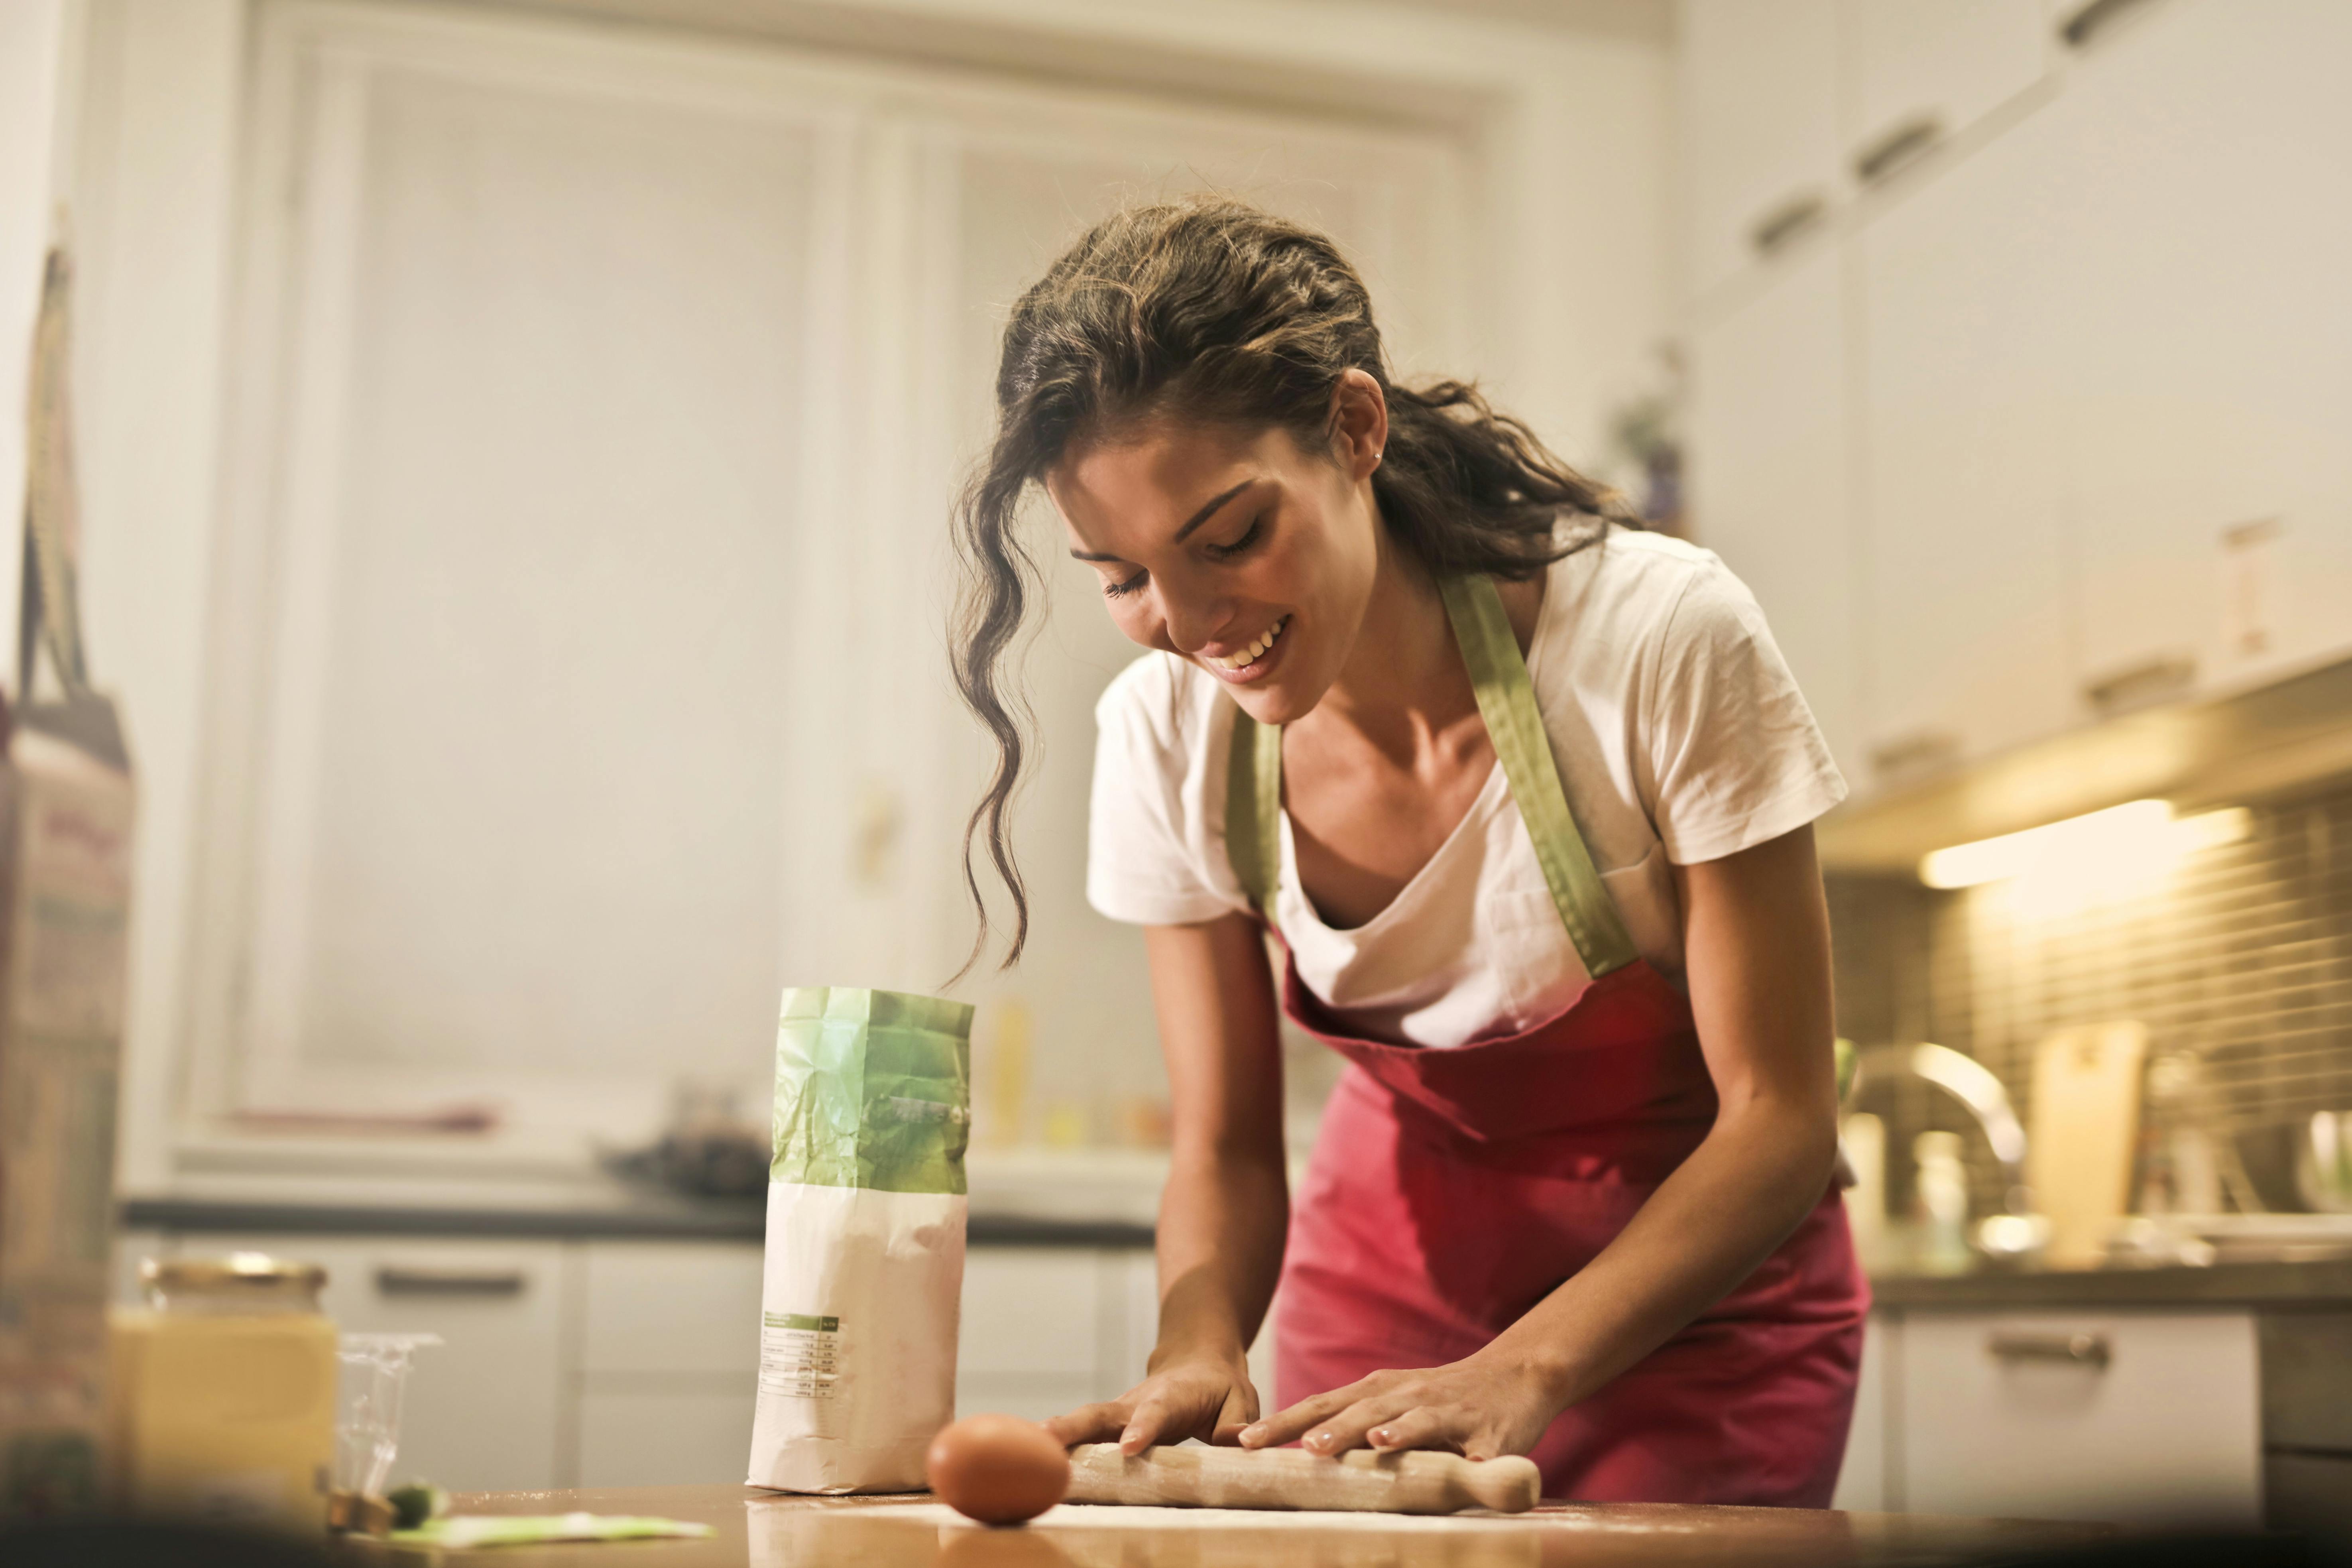 Happy woman with rolling pin cooking at home | Source: Pexels